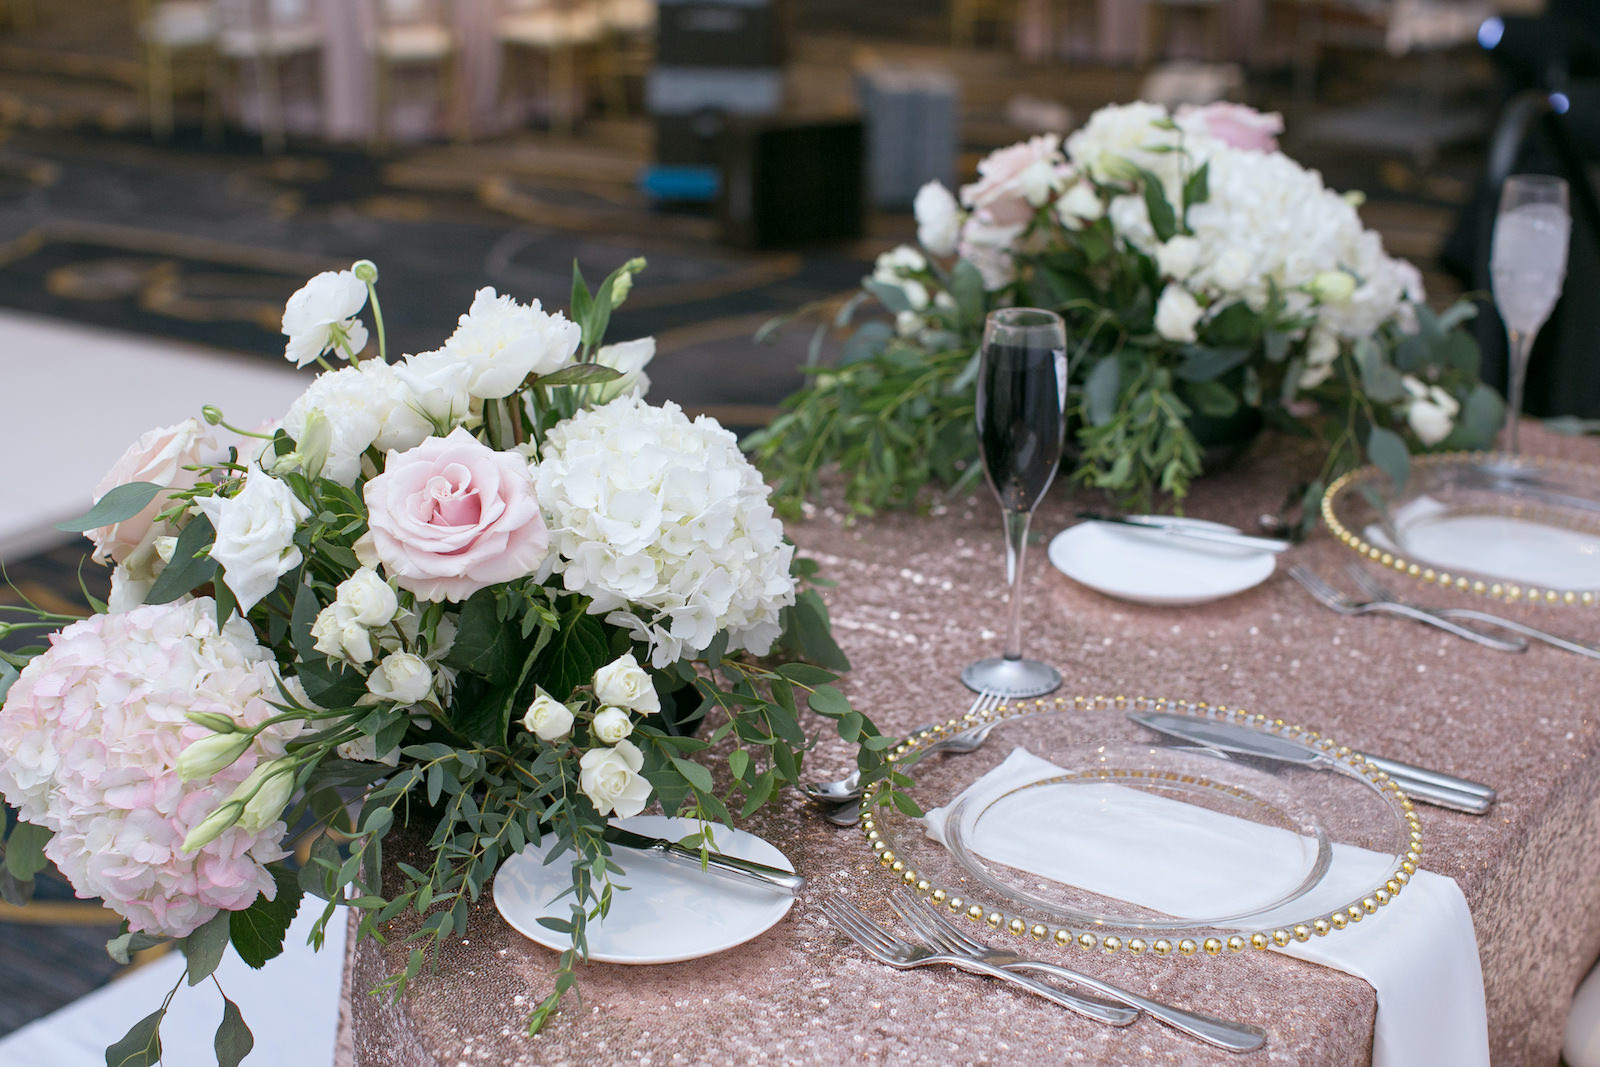 Wedding Sweetheart Table | Blush Pink Rose Gold Sequin Table Linens with Gold Chiavari Chairs and Gold Rim Beaded Edge Glass Chargers | Blush Pink and White Centerpieces with Roses, Hydrangea, and Eucalyptus Greenery